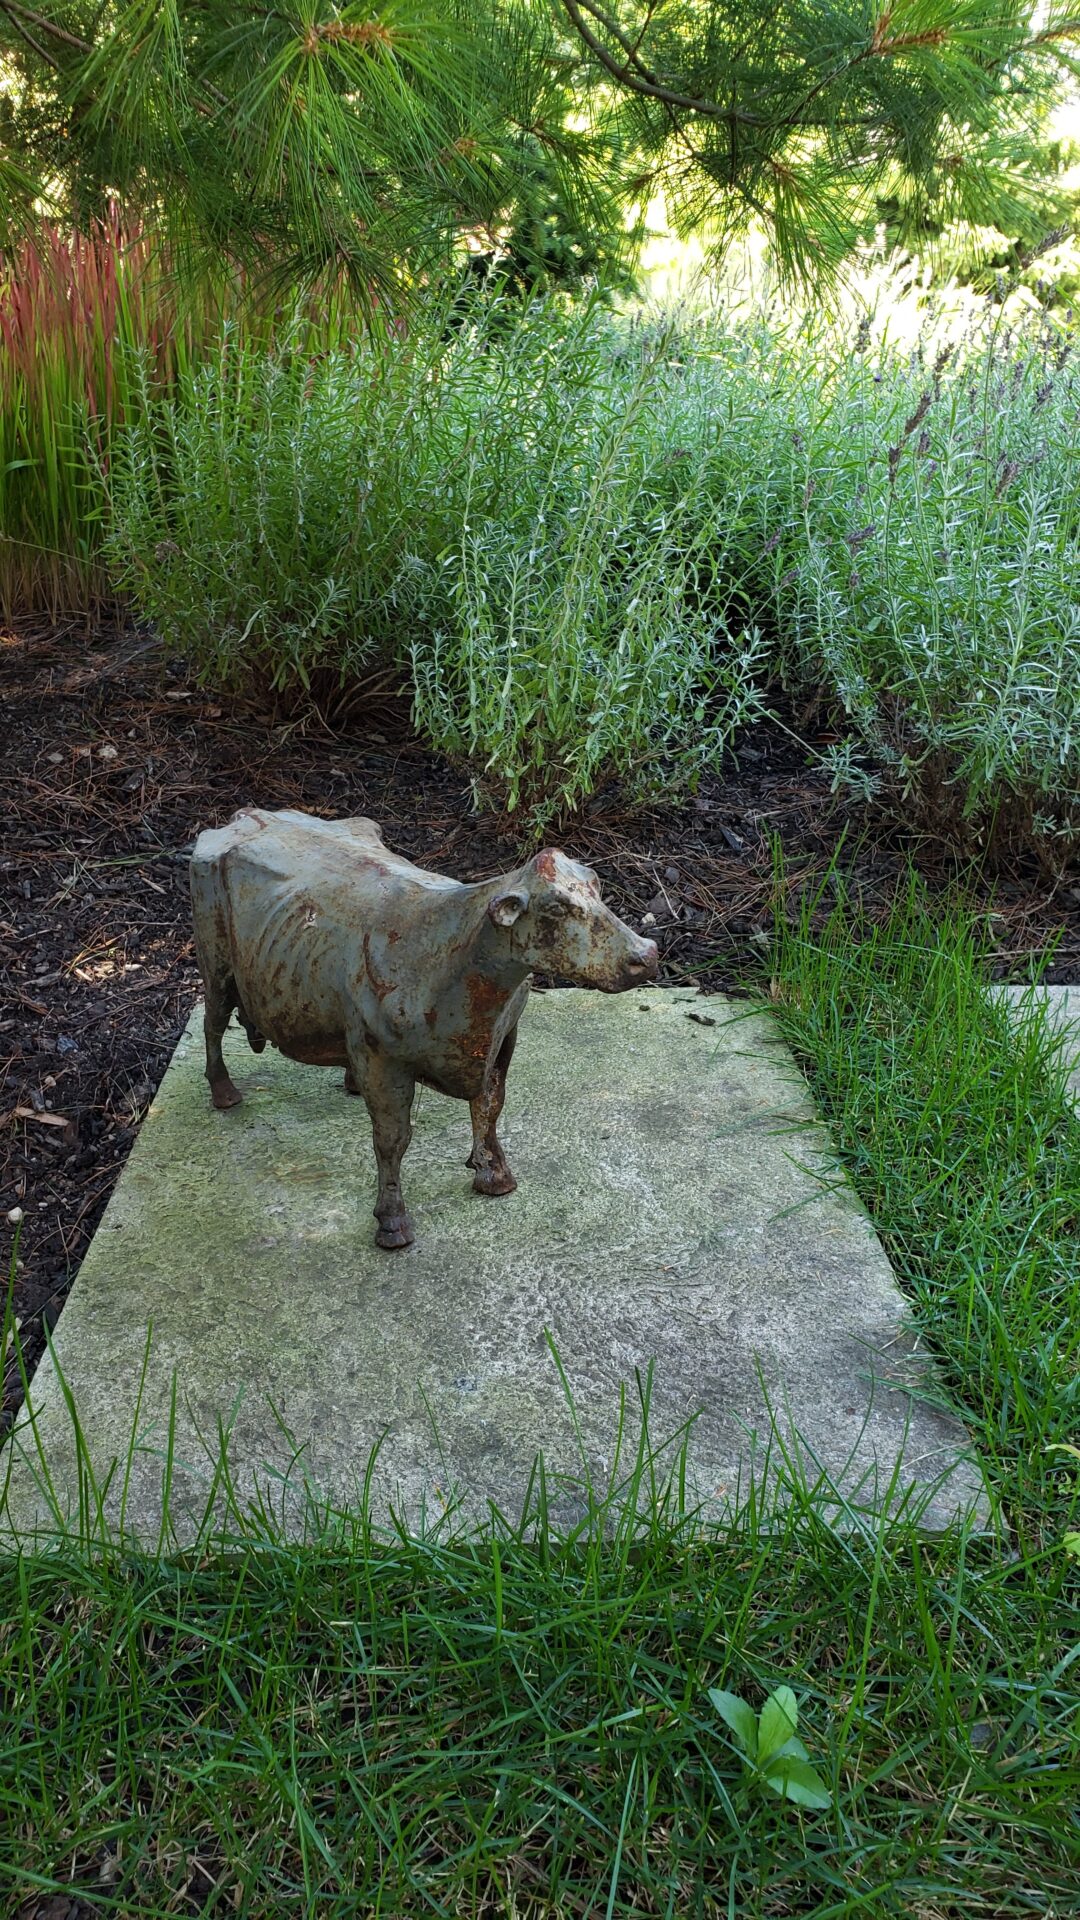 Rusted metal cow sculpture stands on a stone slab amidst green plants, with pine needles and lavender in a tranquil garden setting.